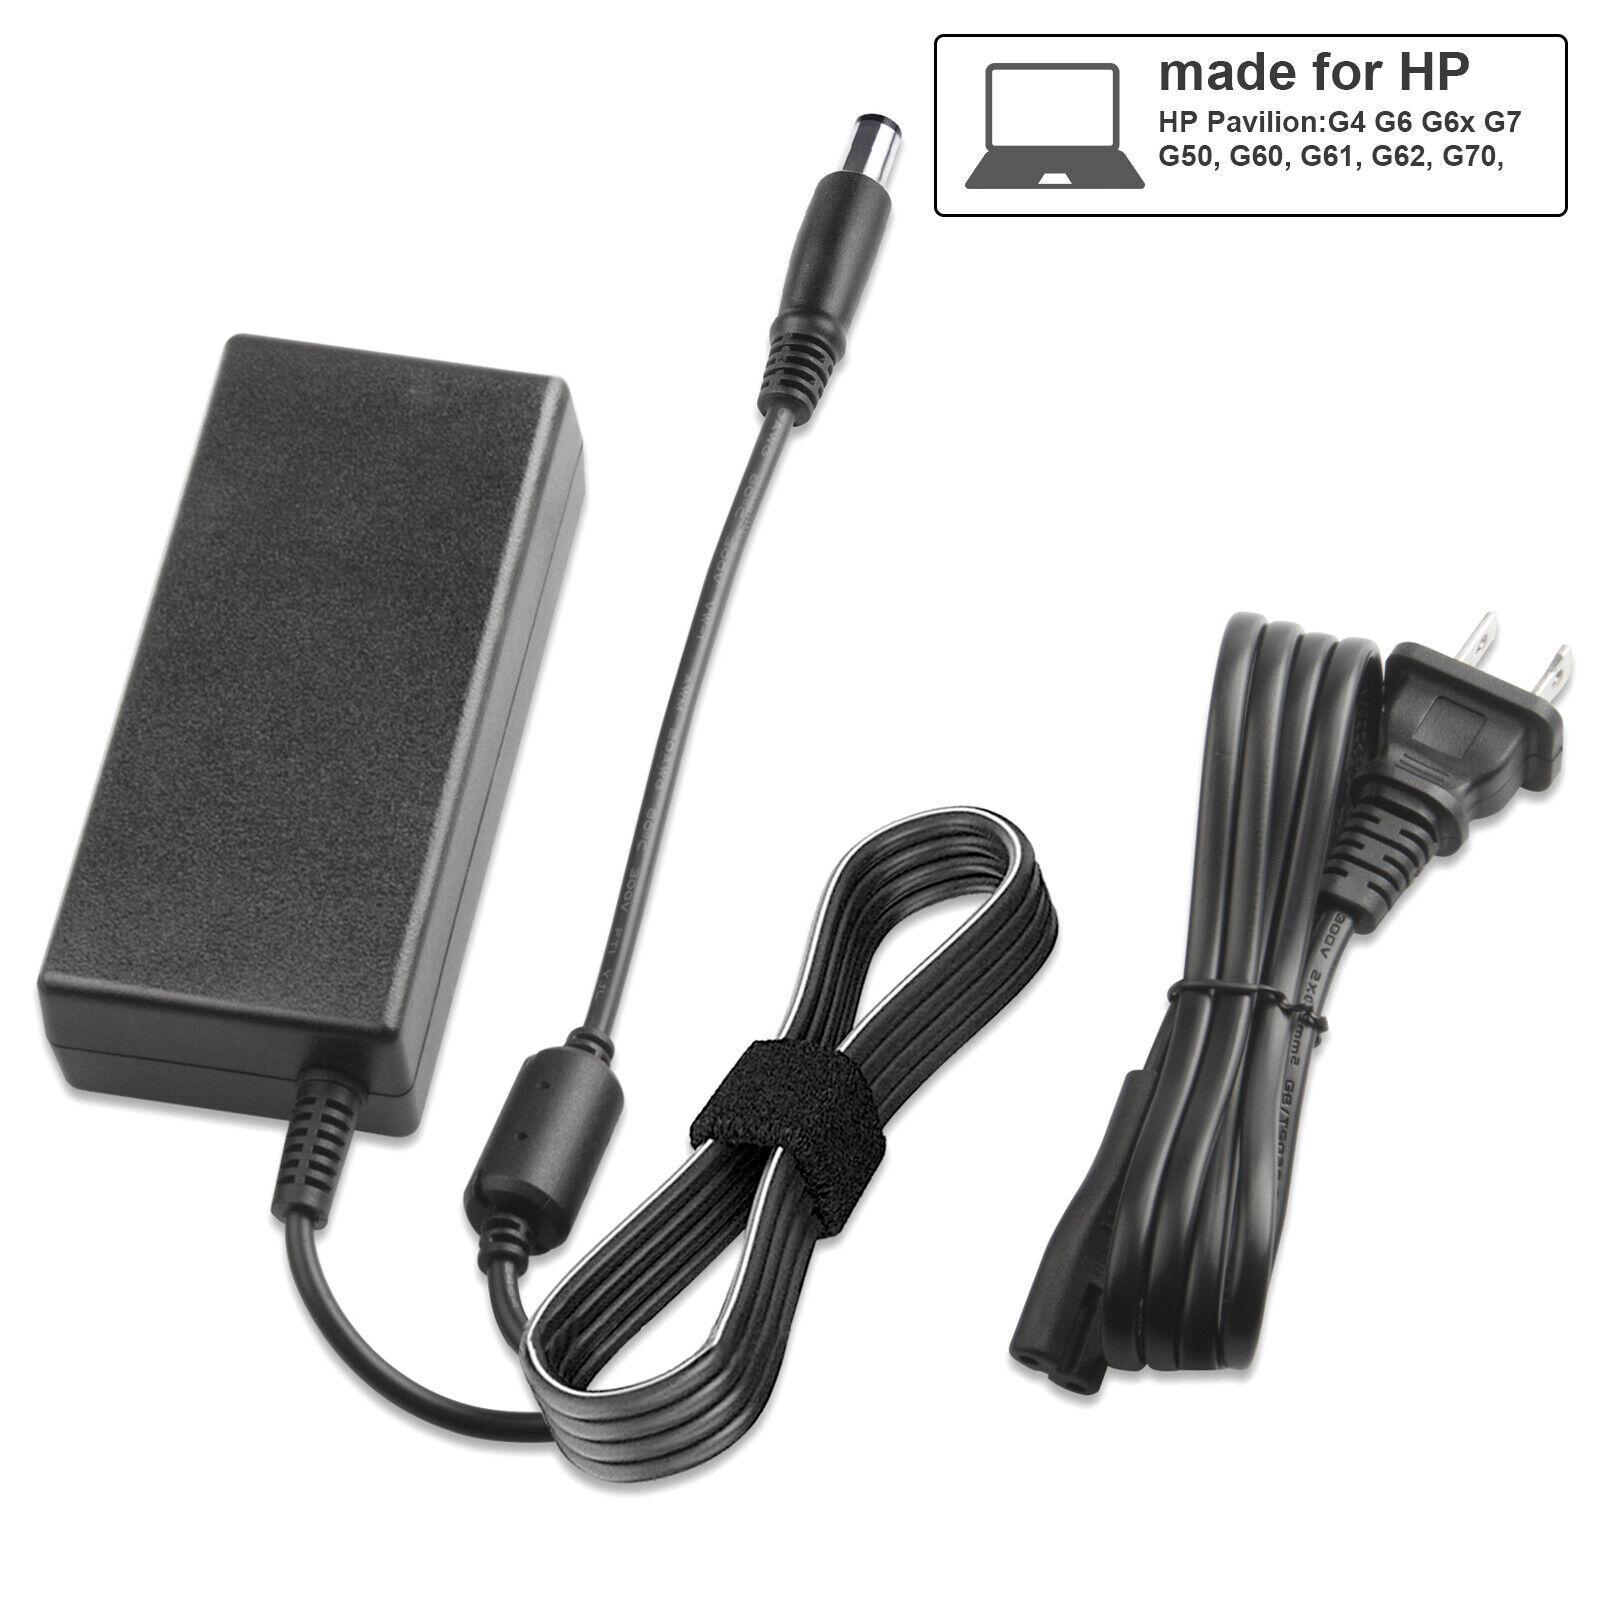 Laptop Charger Adapter for HP Stream,HP EliteBook,HP Pavilion,HP ENVY,TouchSmart